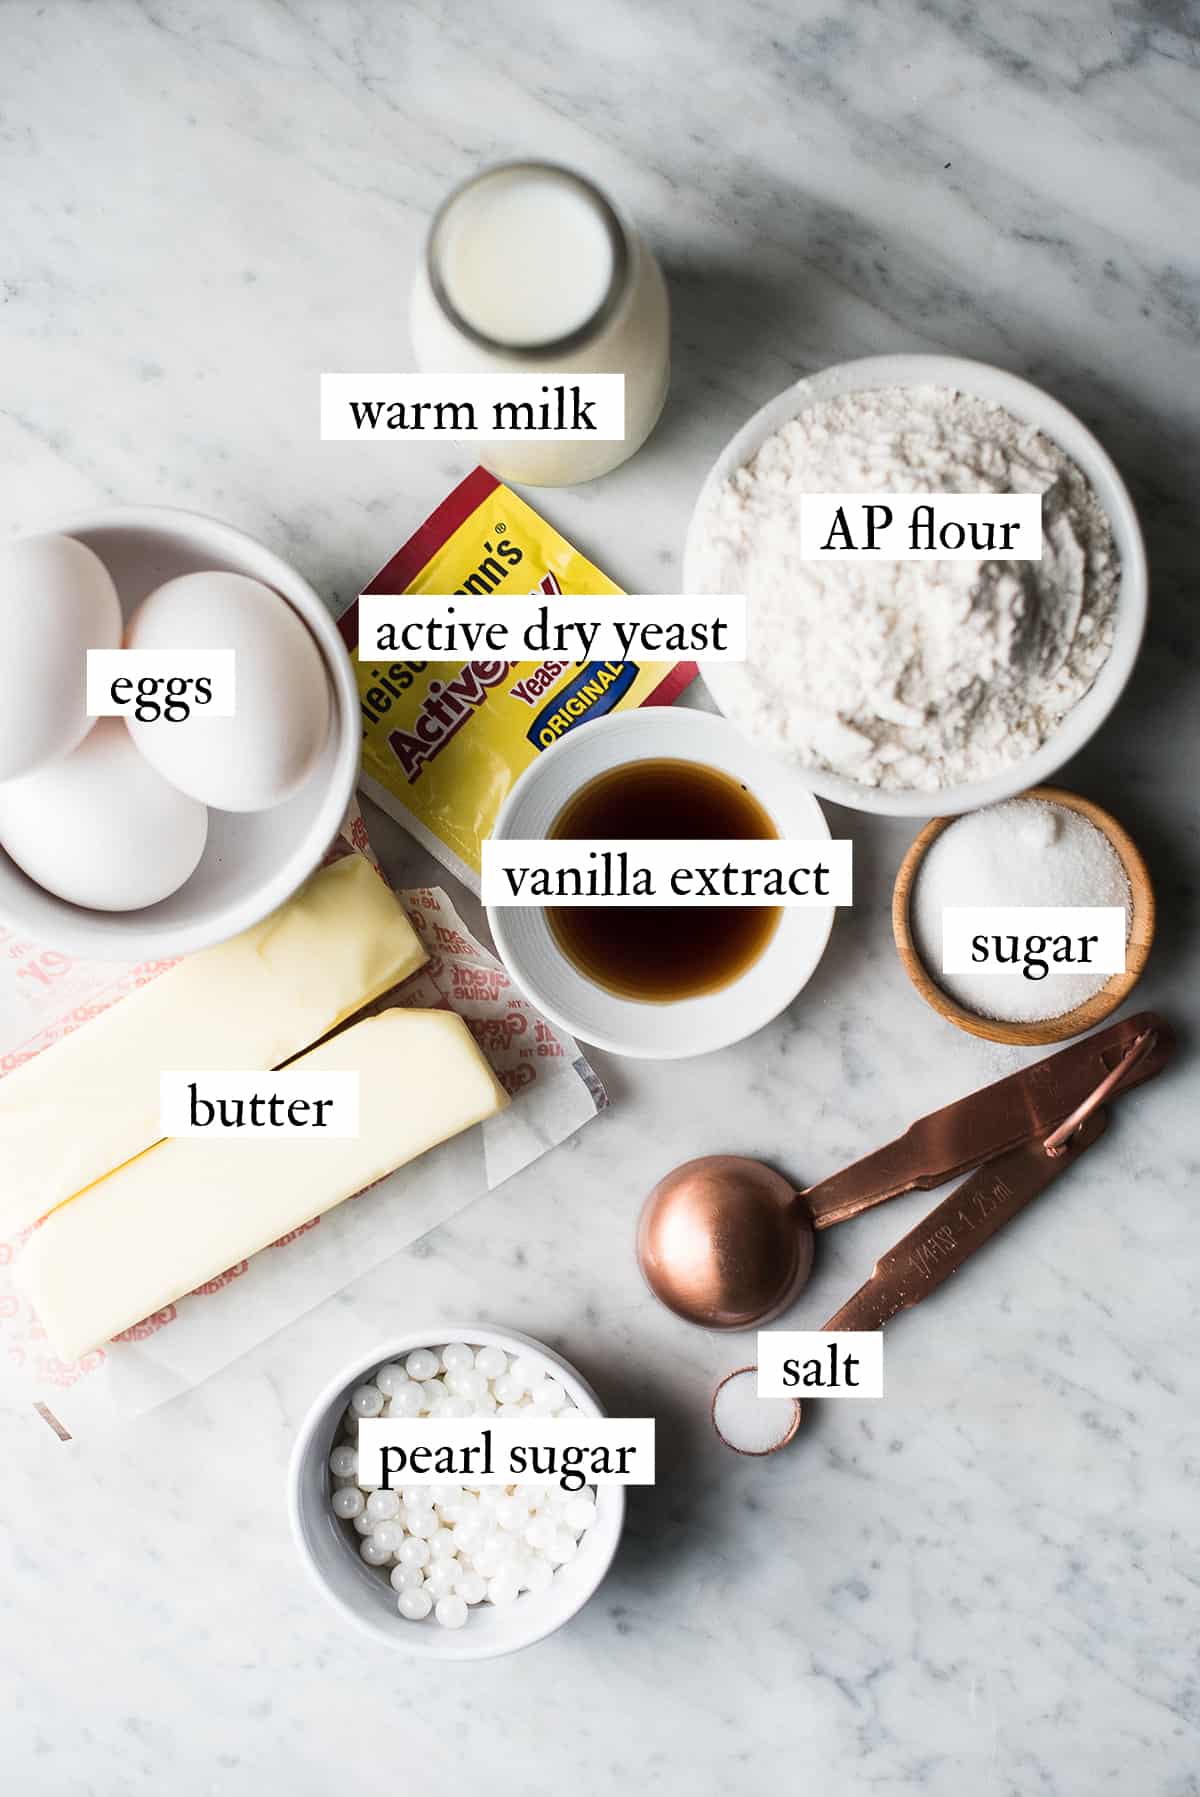 ingredients for liege waffles on marble countertop